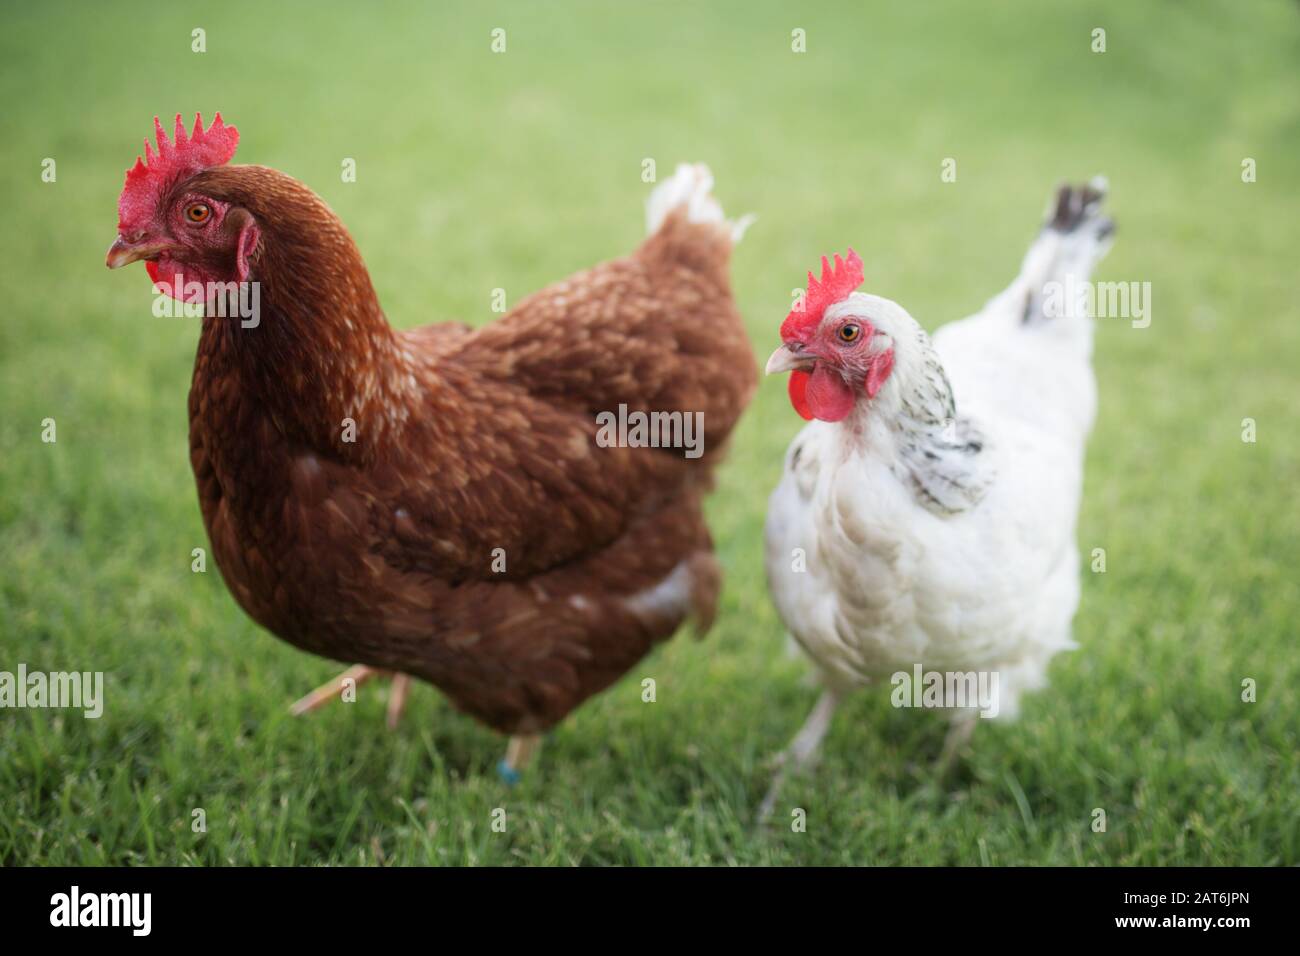 red brown isa and small white sussex chickens standing next to each other Stock Photo